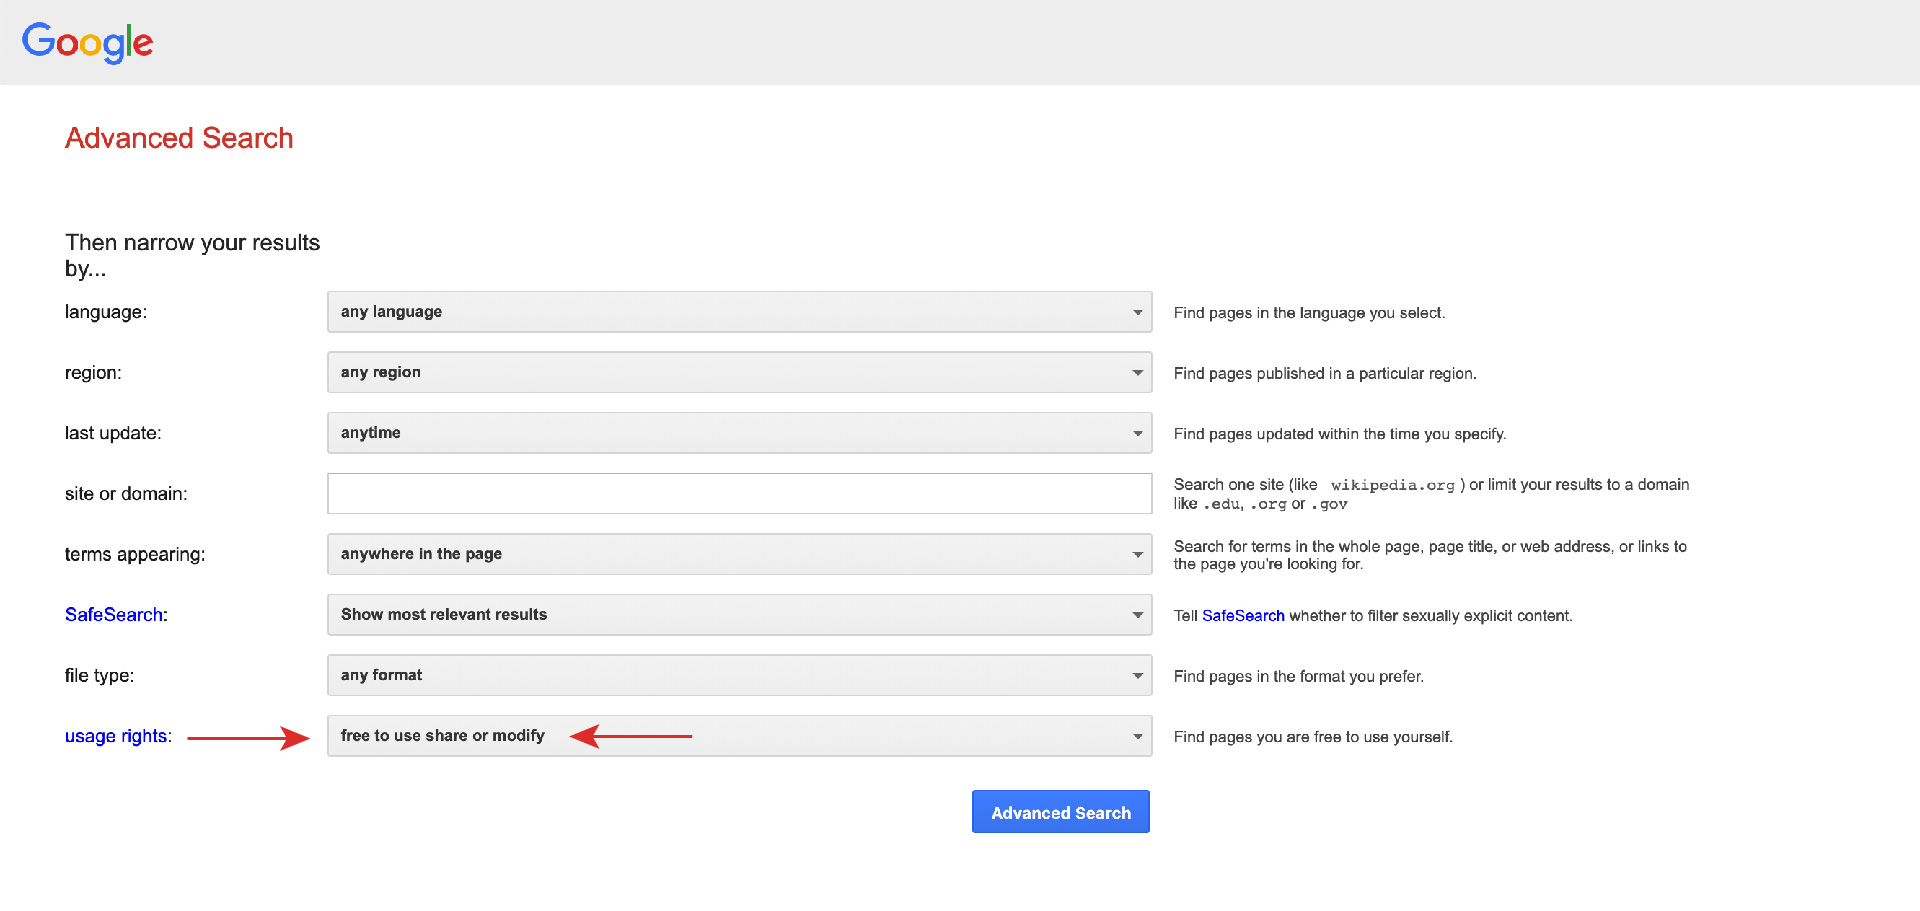 Screenshot of the Google Advanced Search page, with the "Usage Rights" filter highlighted by arrows.